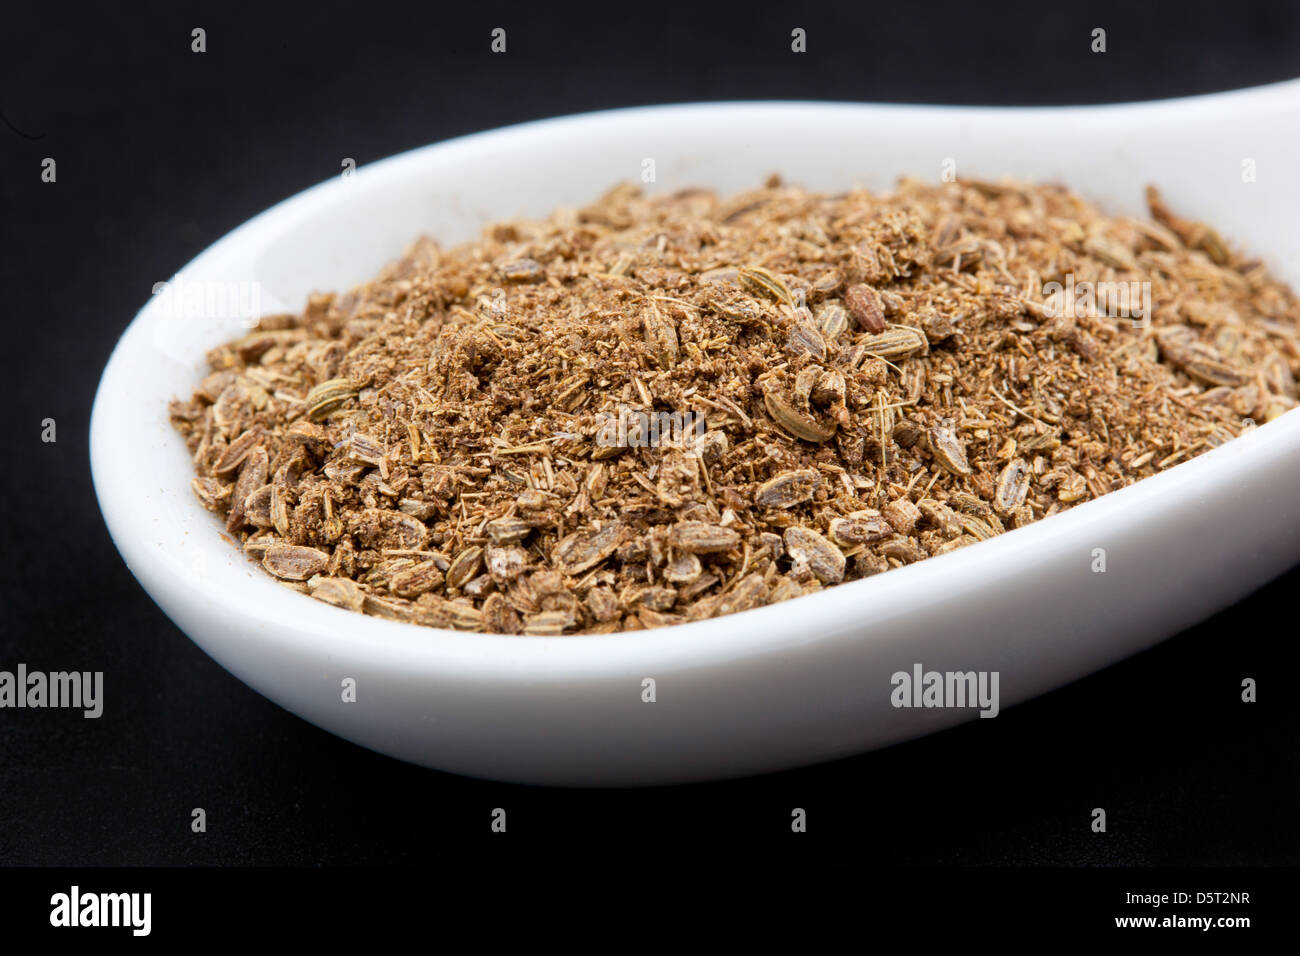 Fennel seeds and ground coriander on a black background Stock Photo